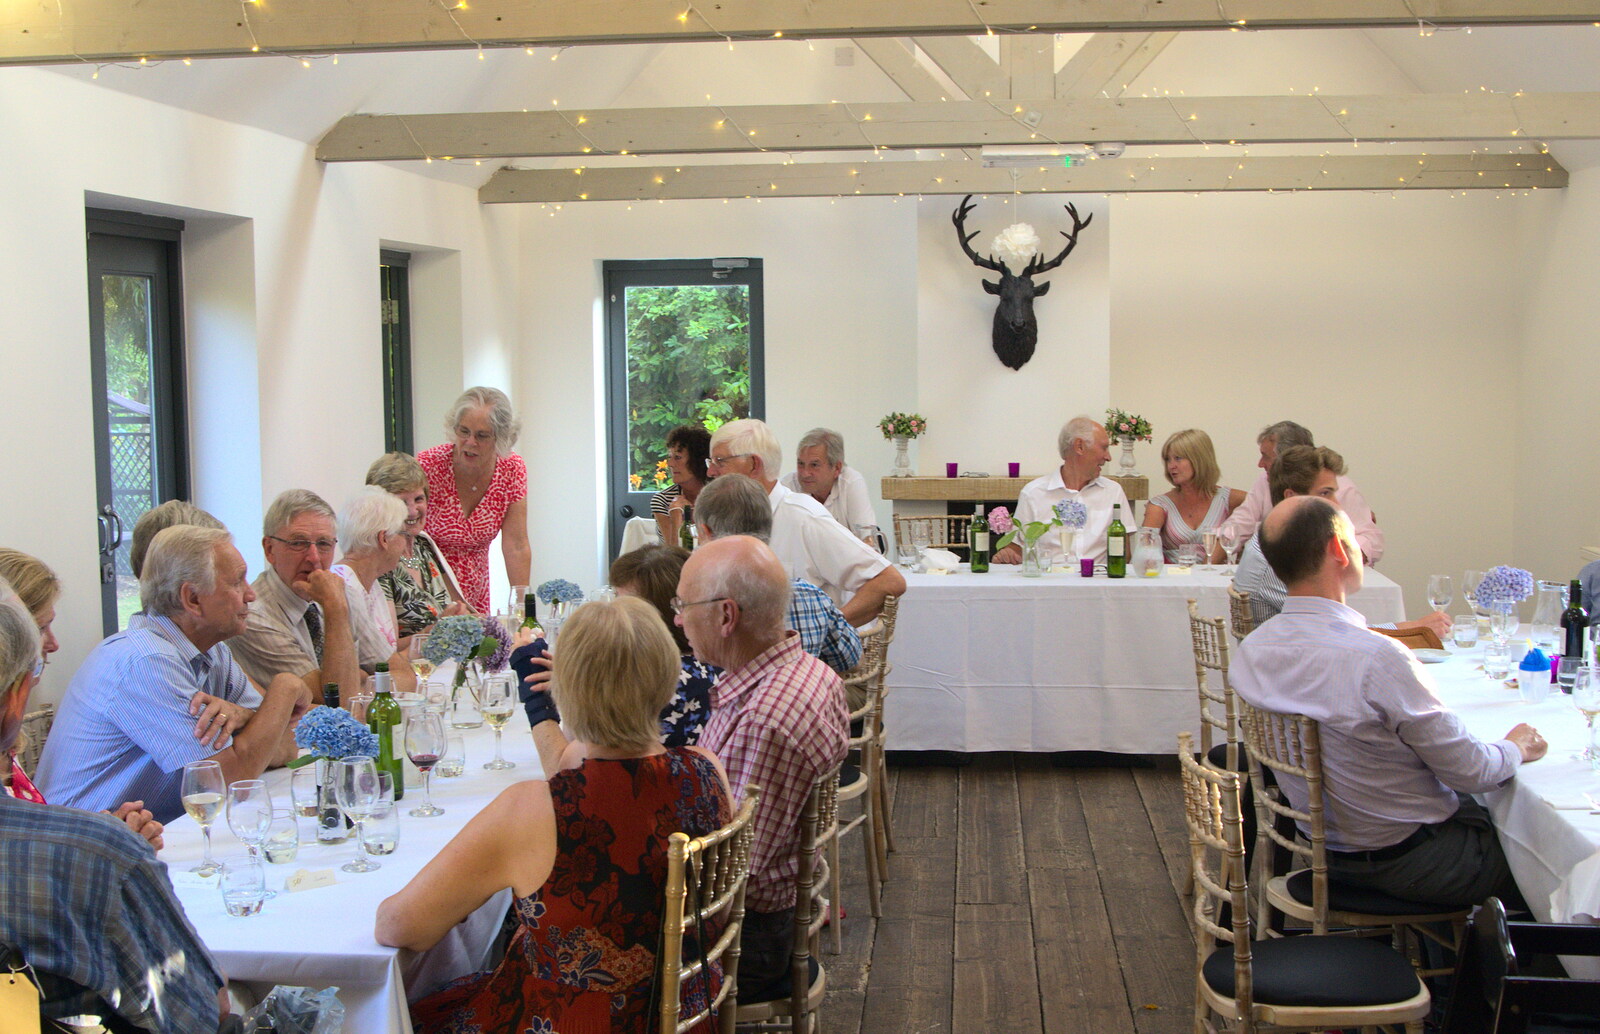 Berenice works the room from Bob and Bernice's 50th Wedding Anniversary, Hinton Admiral, Dorset - 25th July 2014